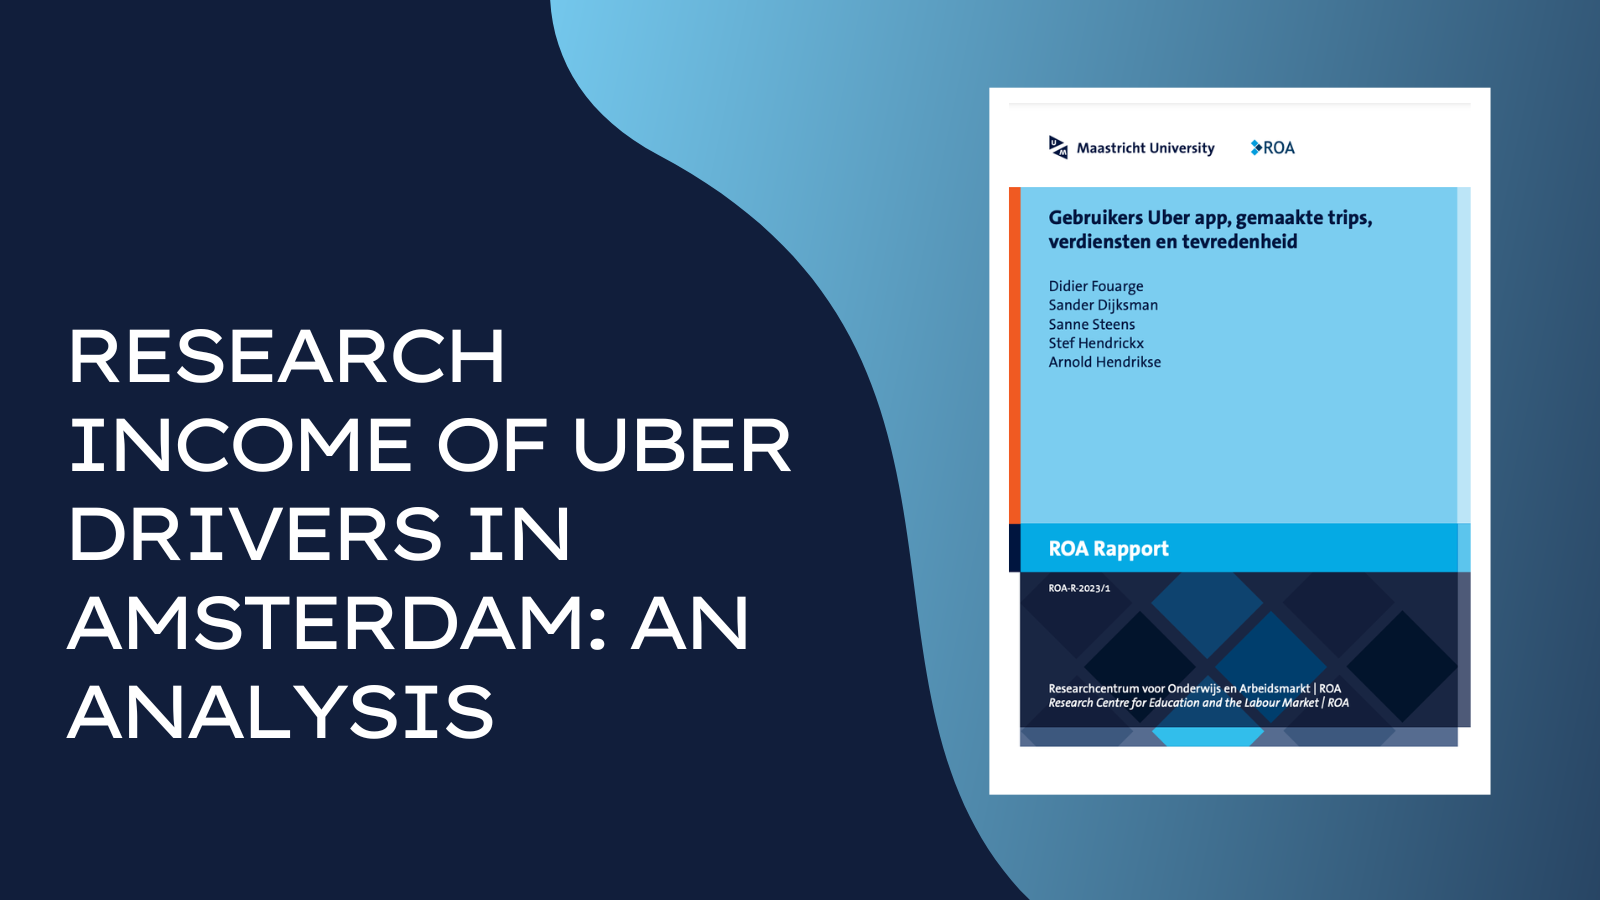 Research income of Uber drivers in Amsterdam: an analysis